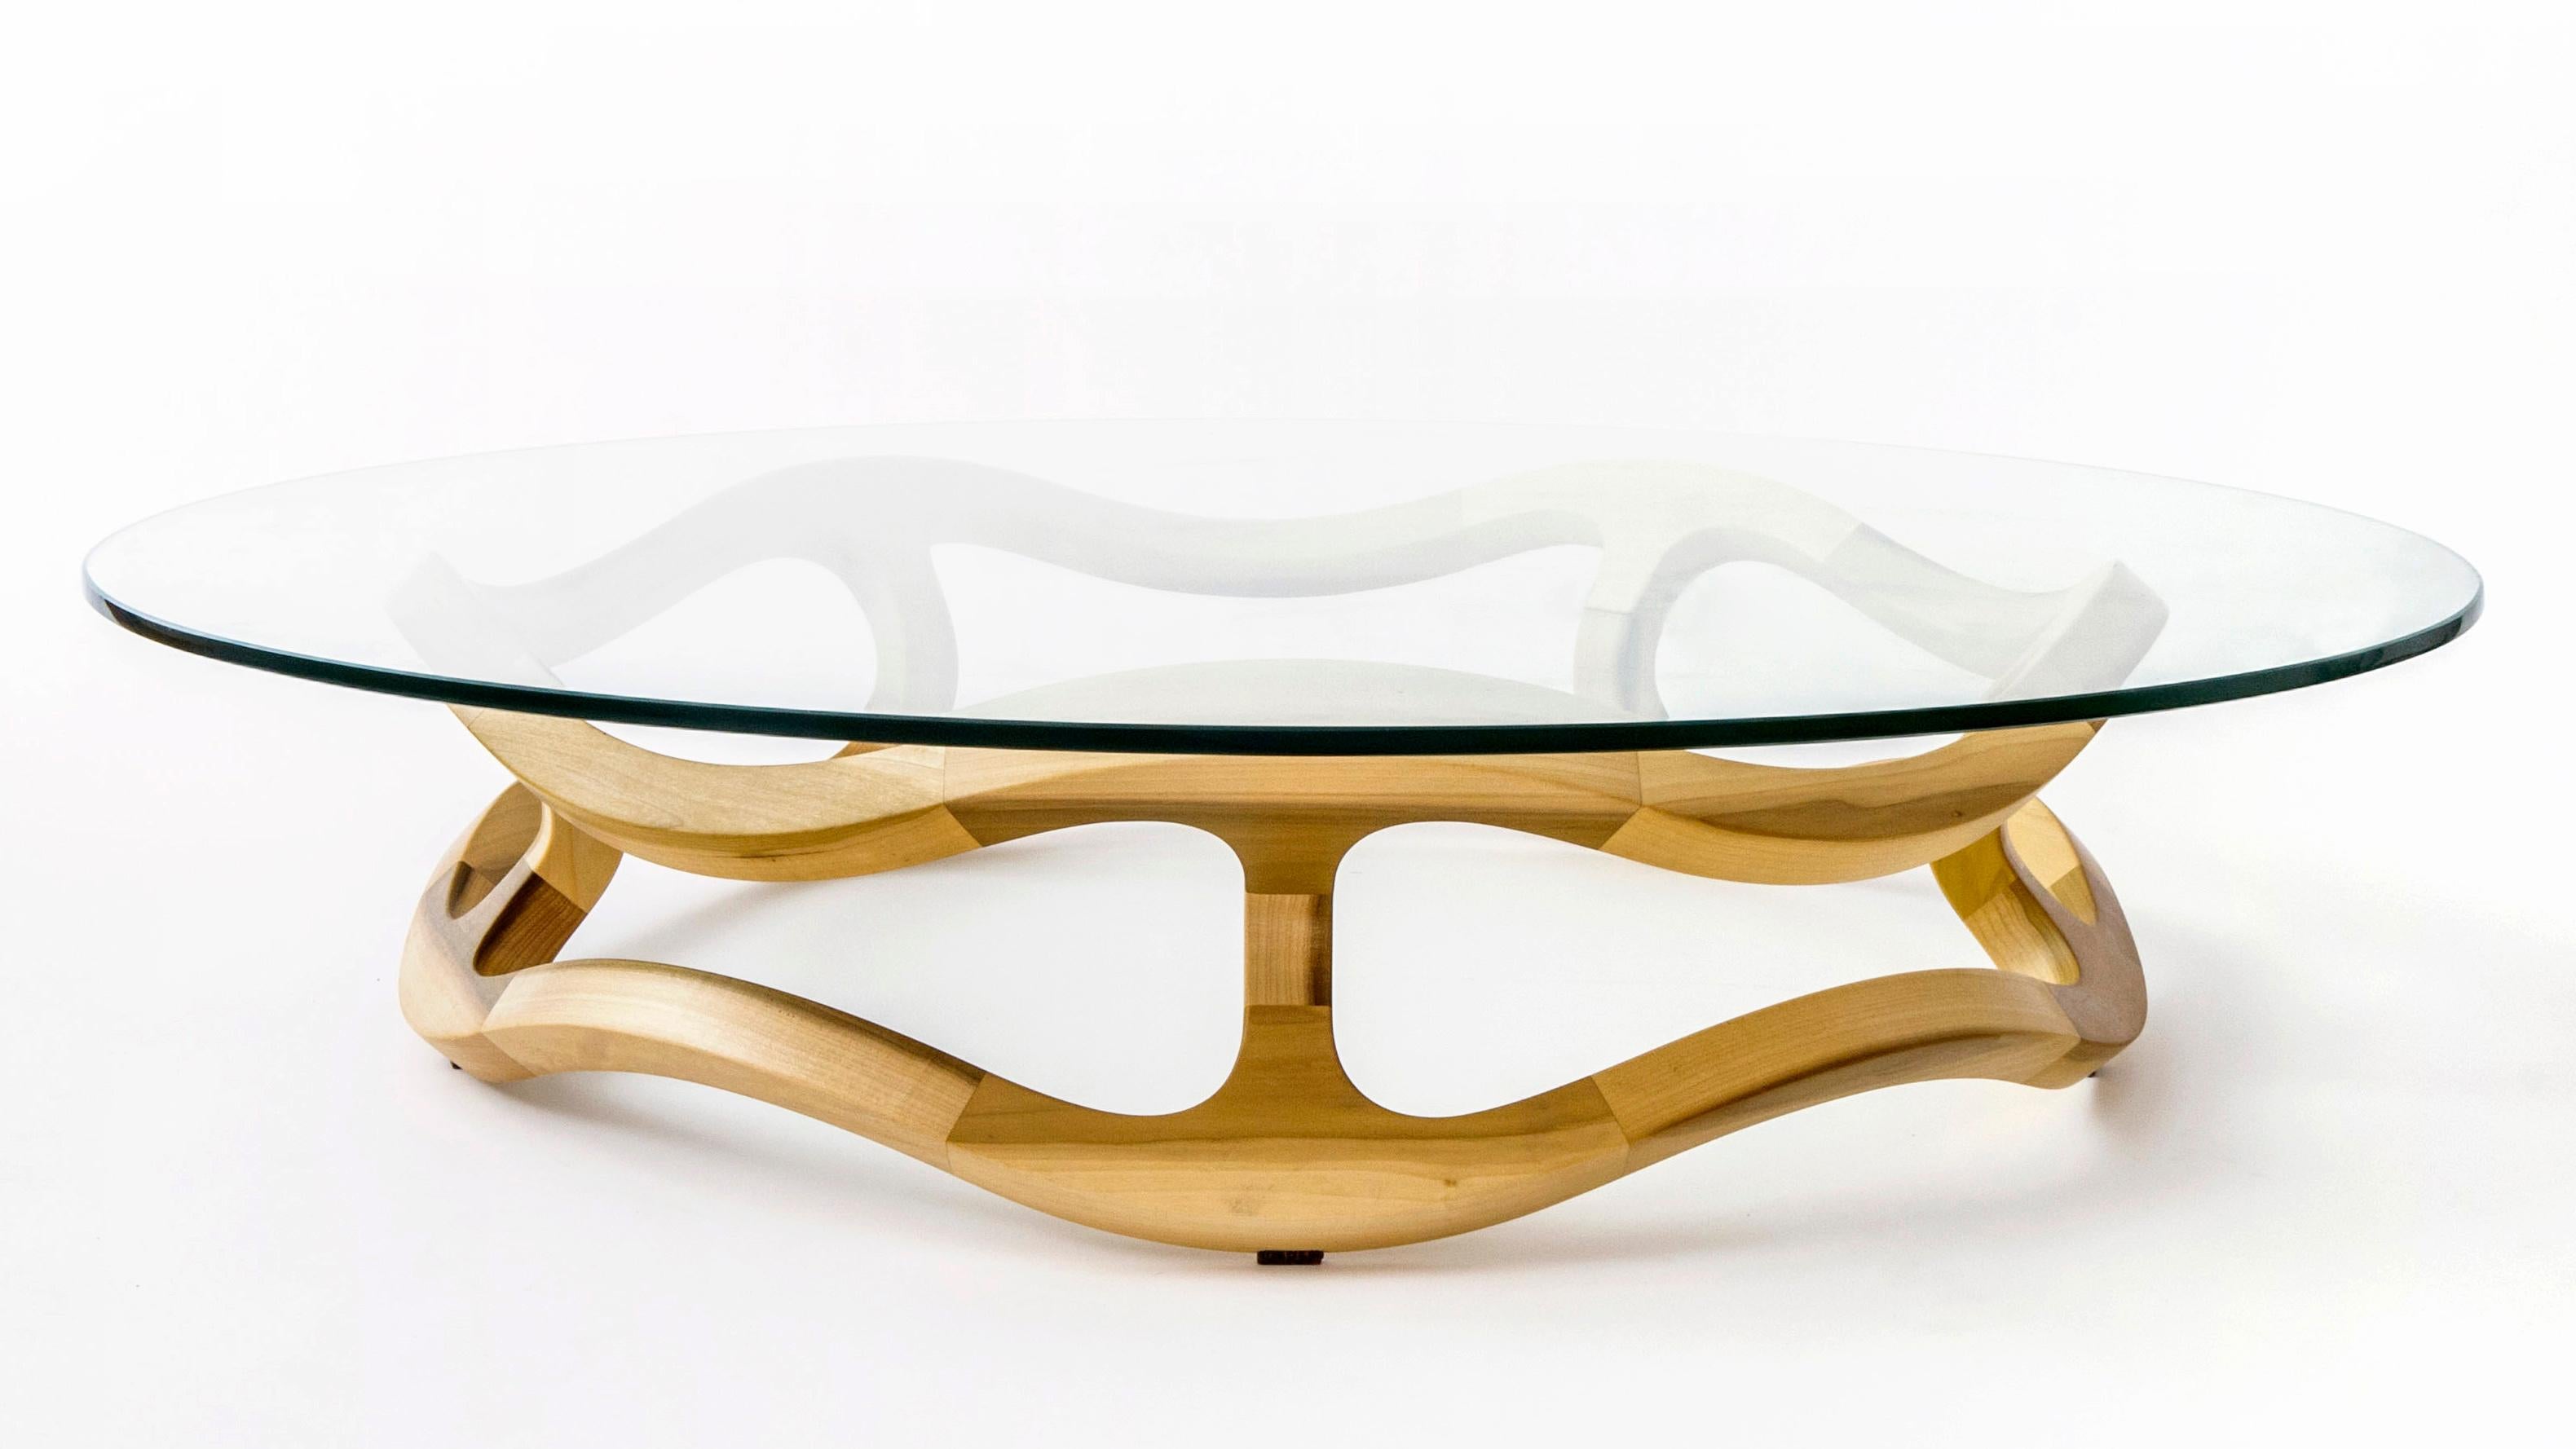 Mexican Flamenca, Geometric Sculptural Center Table Made of Solid Wood by Pedro Cerisola For Sale